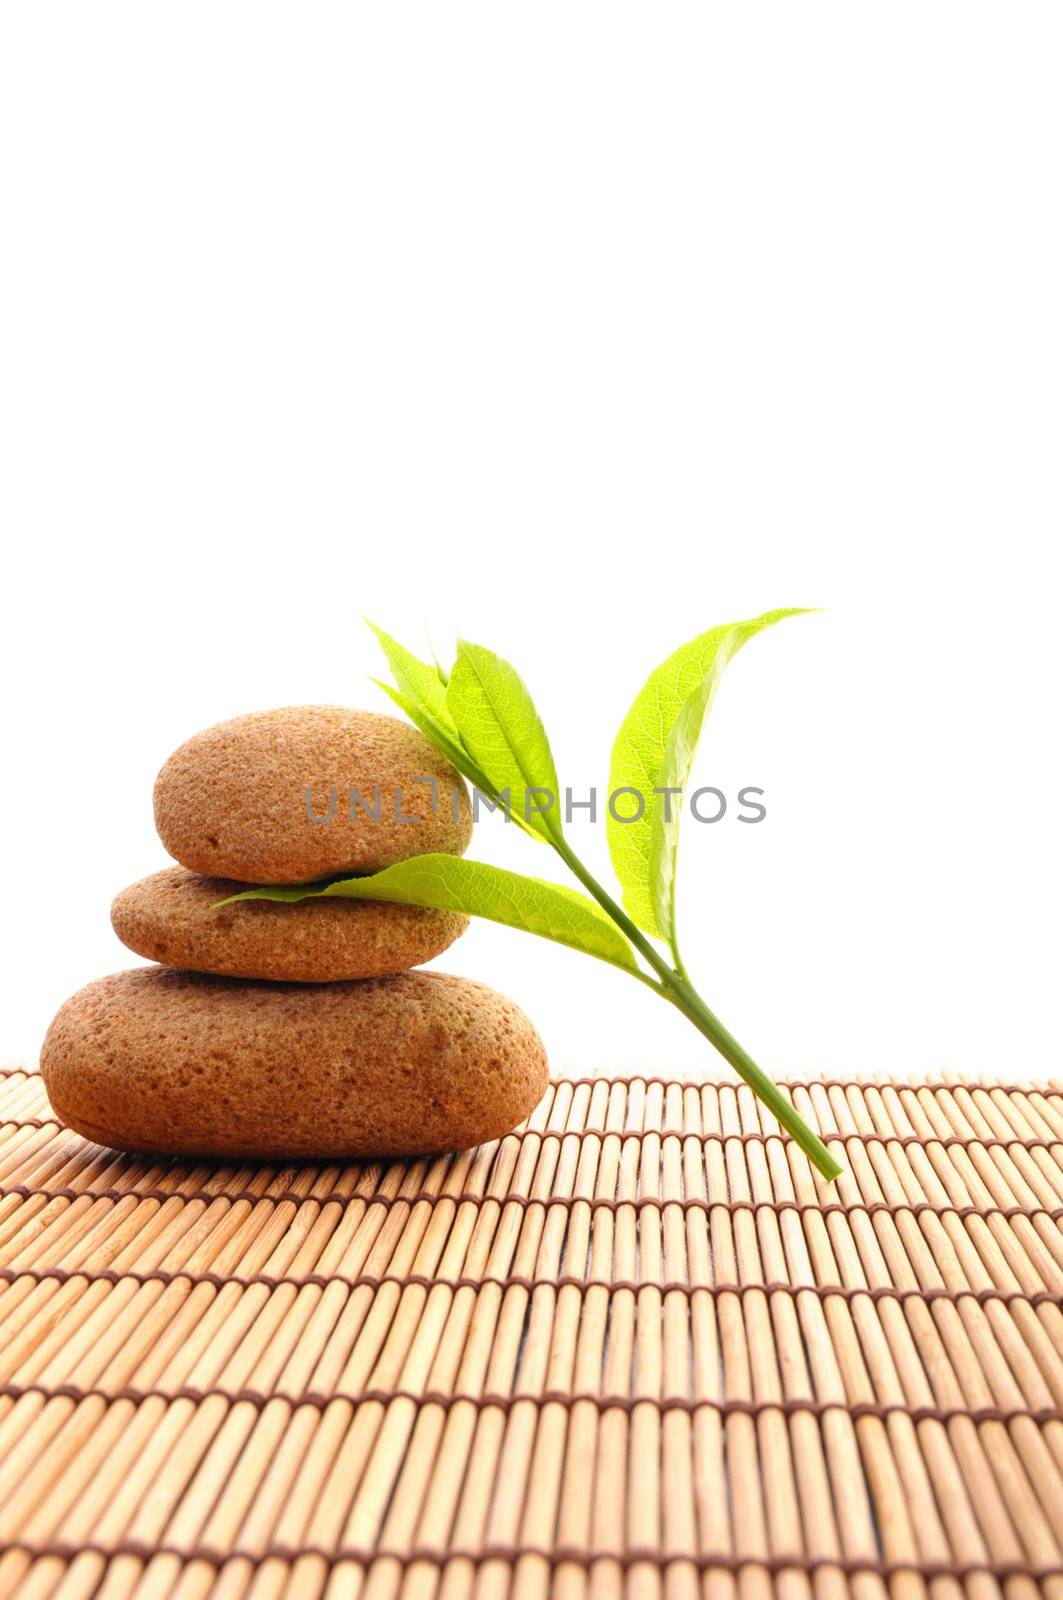 spa still life with zen stone and green leaf